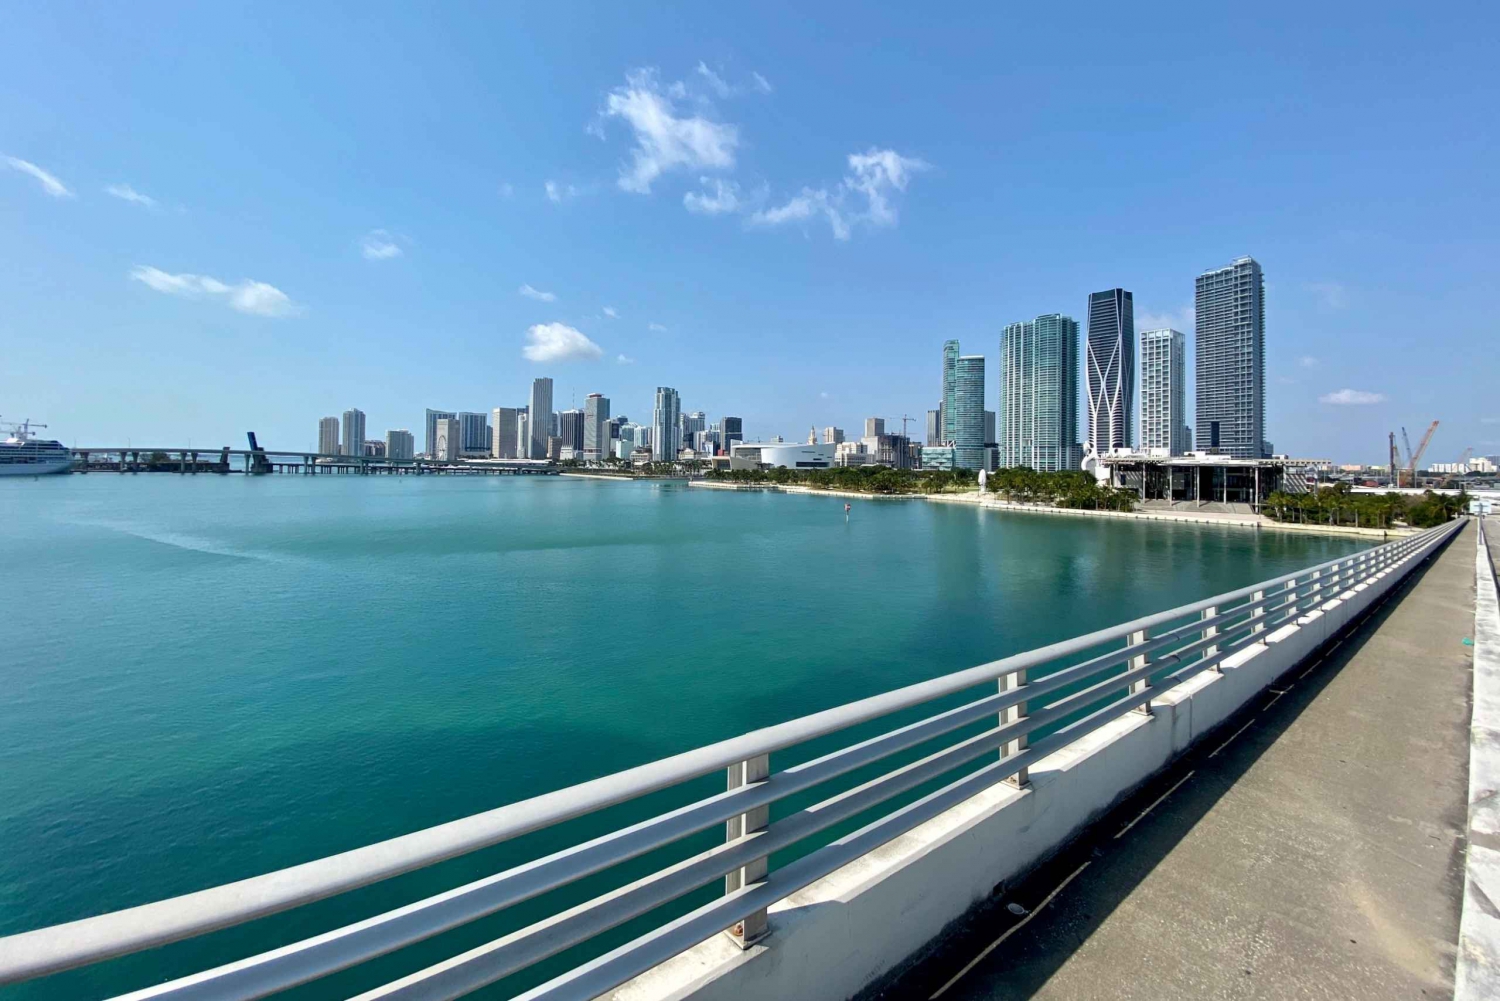 Miami: Half-Day Tour from South Beach to Little Havana